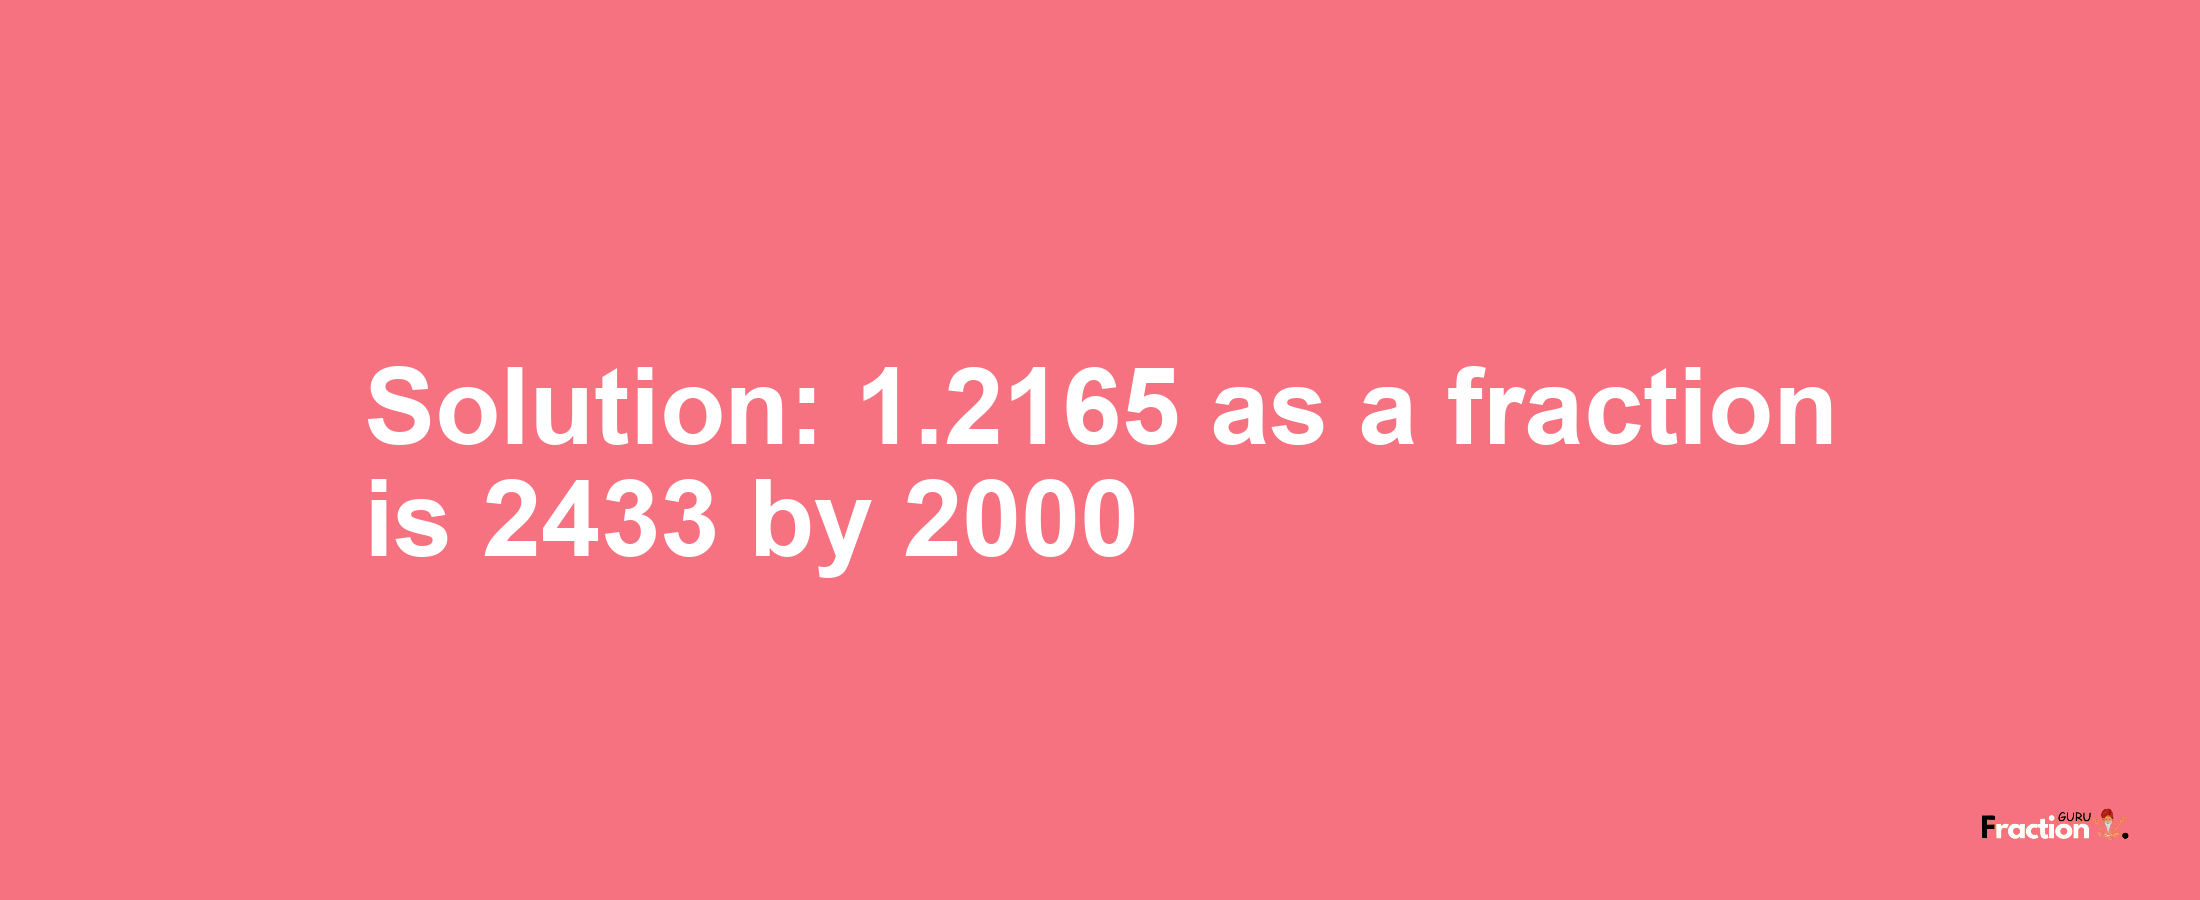 Solution:1.2165 as a fraction is 2433/2000